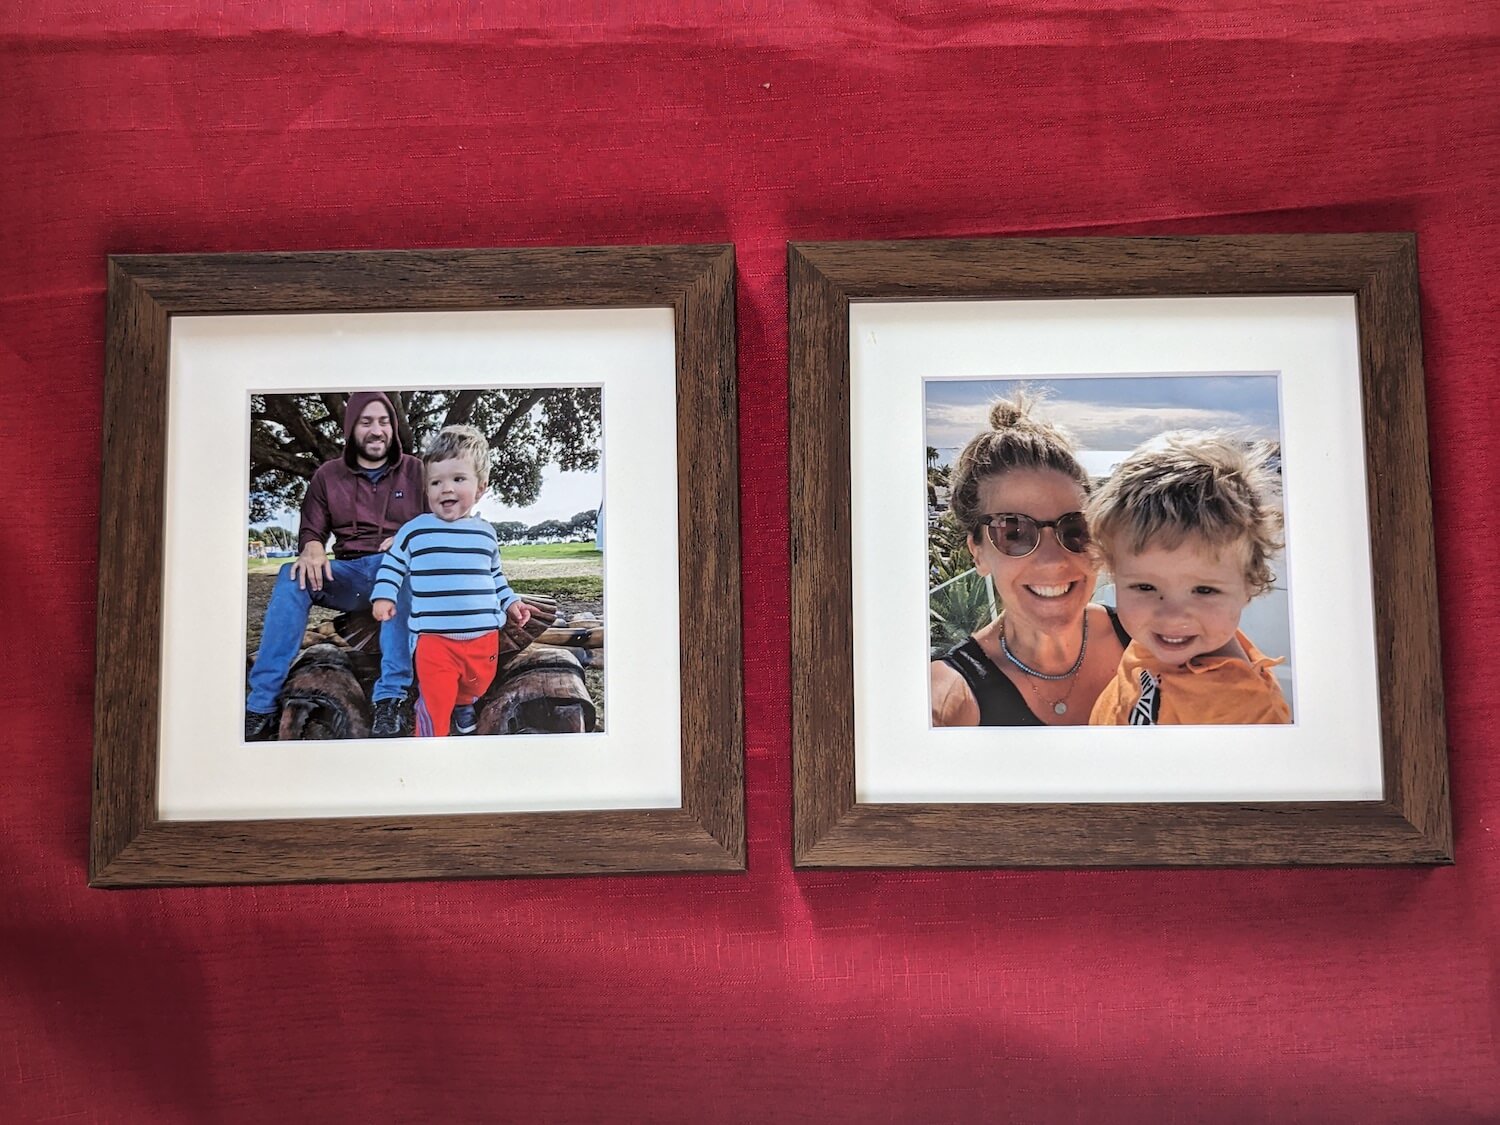 CanvasDiscount.com Review: Framed Prints & Picture Magnets